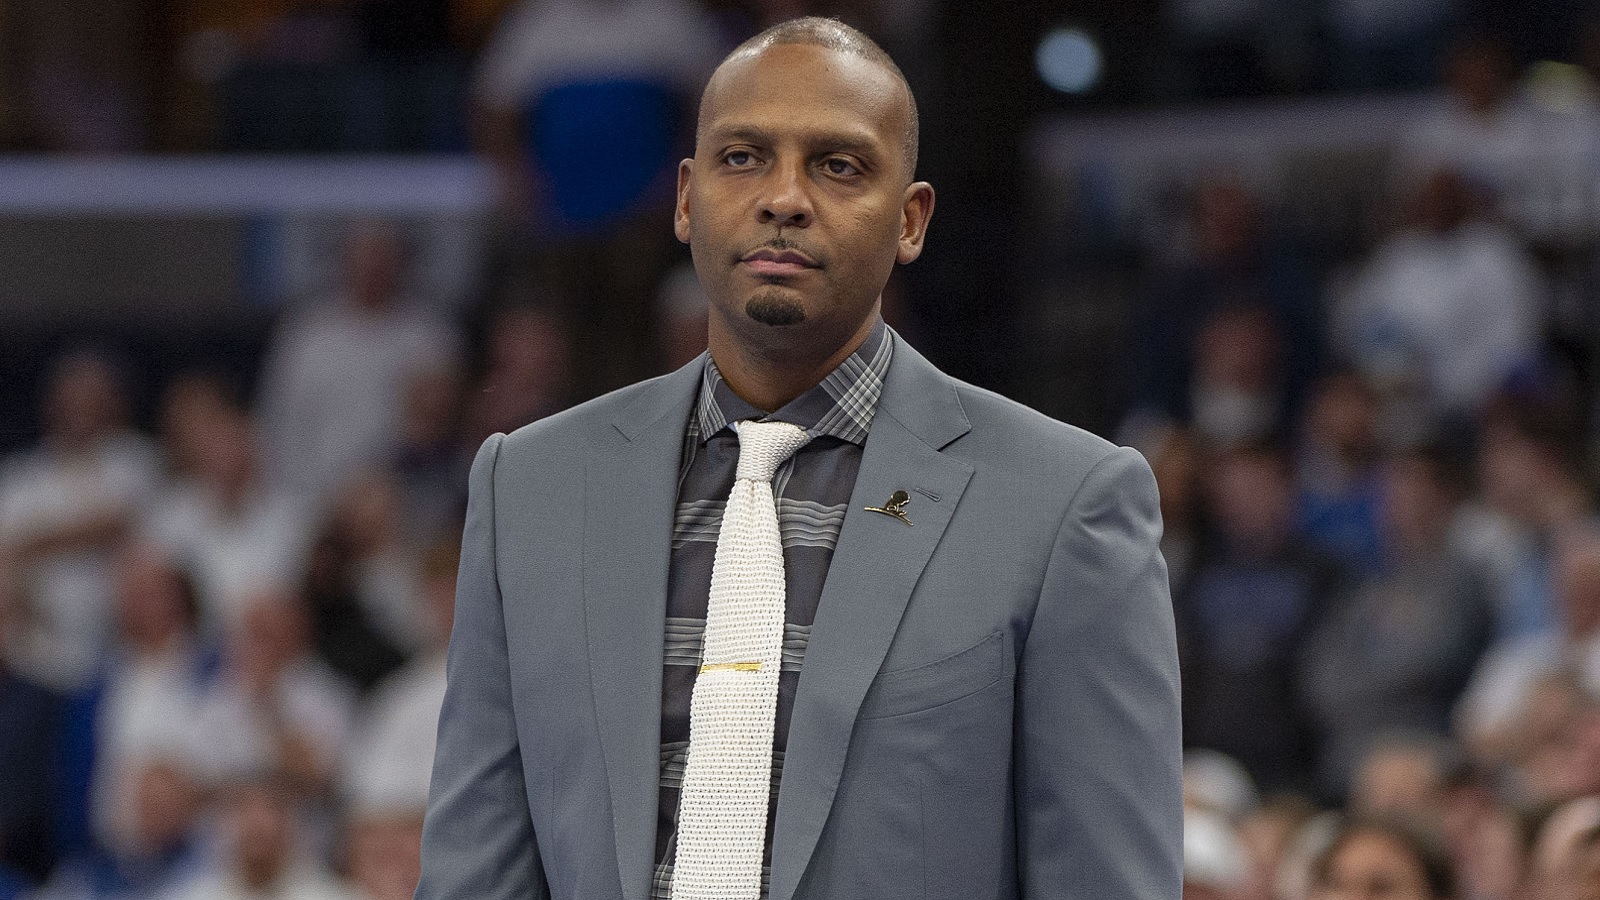 Cover story: Analysis of the value brought by Penny Hardaway as